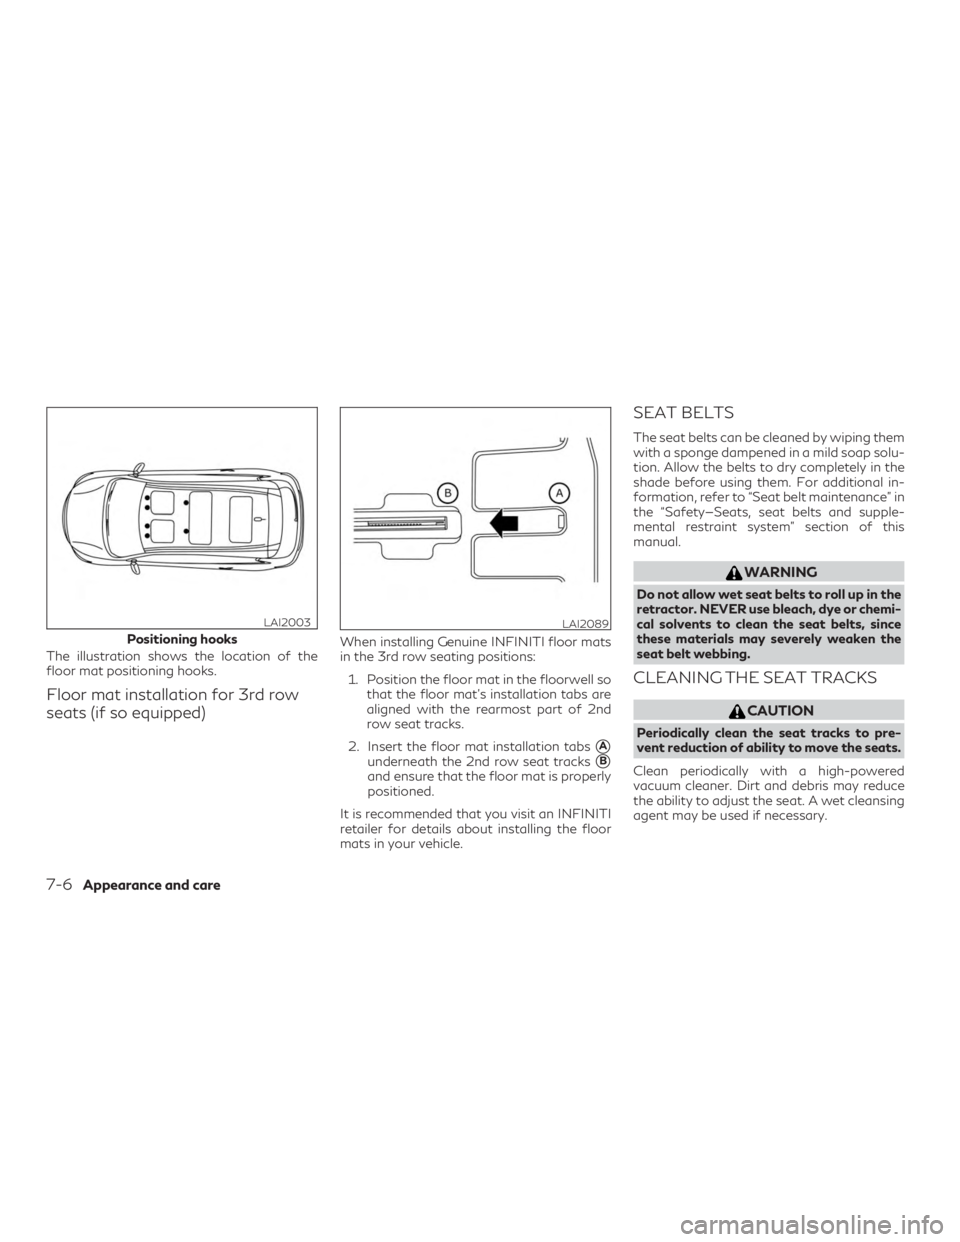 INFINITI QX60 2018 User Guide The illustration shows the location of the
floor mat positioning hooks.
Floor mat installation for 3rd row
seats (if so equipped)
When installing Genuine INFINITI floor mats
in the 3rd row seating pos